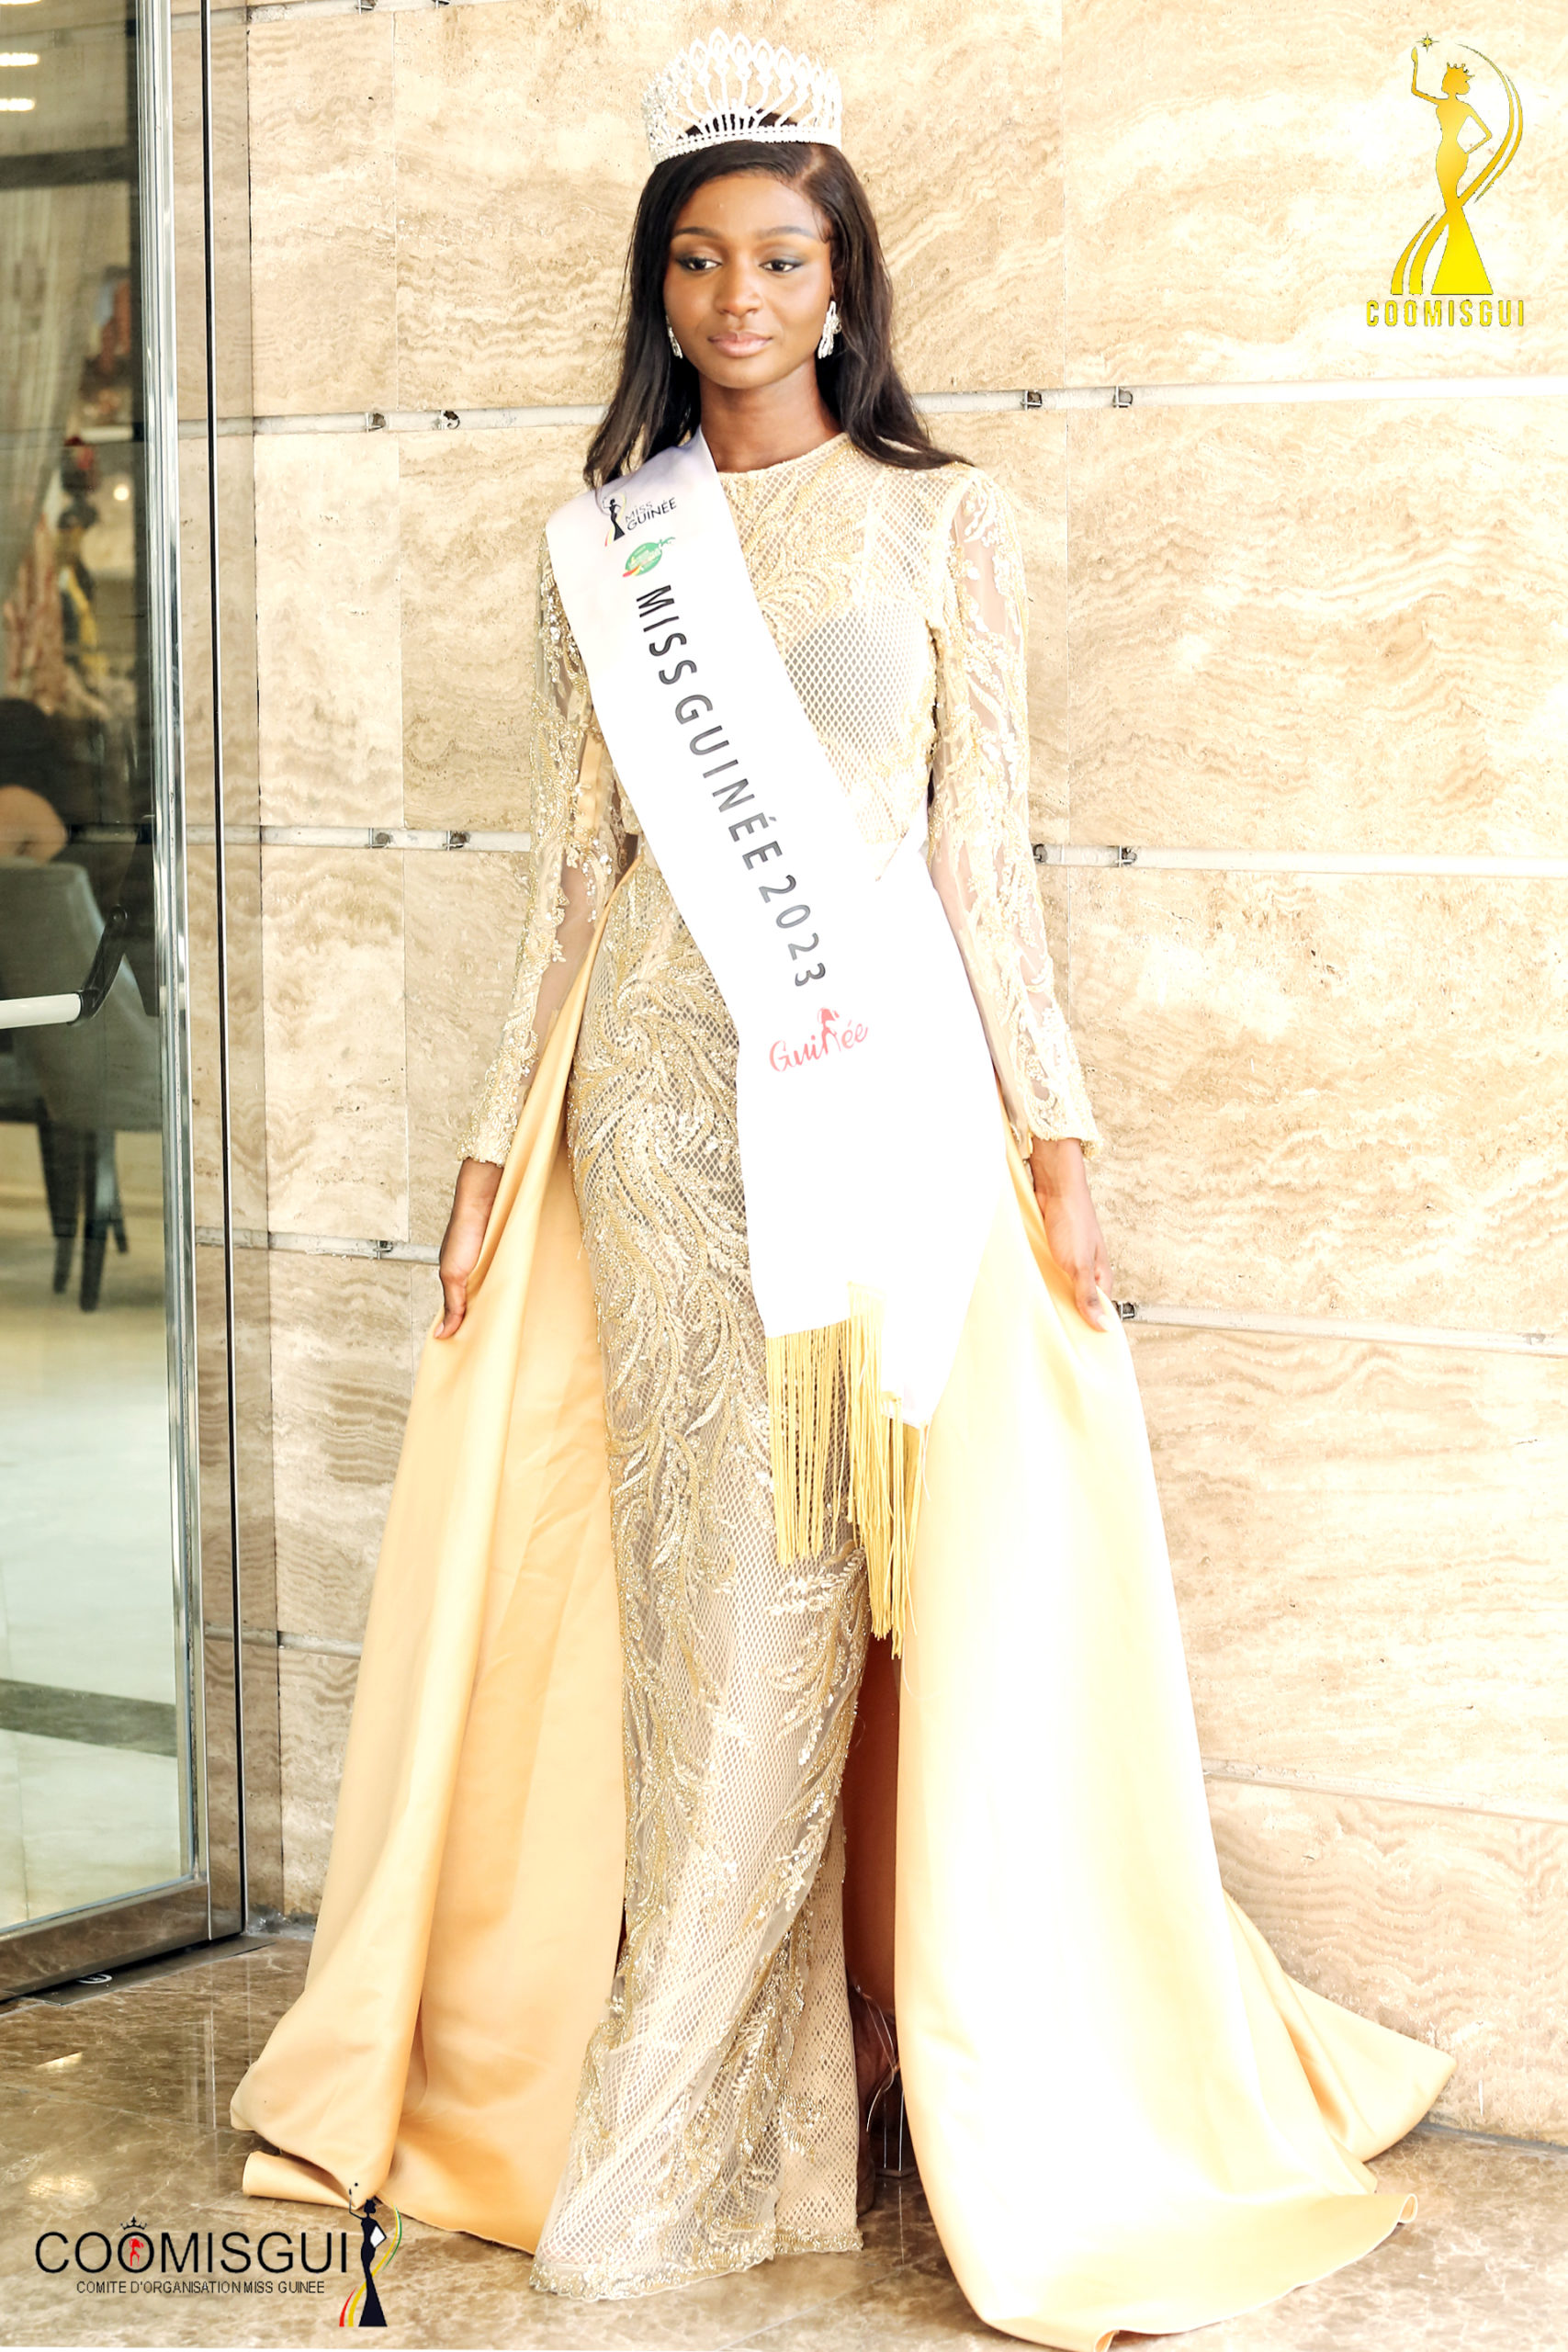 COOMISGUI presents Miss Guinea 2023: Beauty, Grace, and Saran Kourouma's Radiance!" - Exclusive Shooting